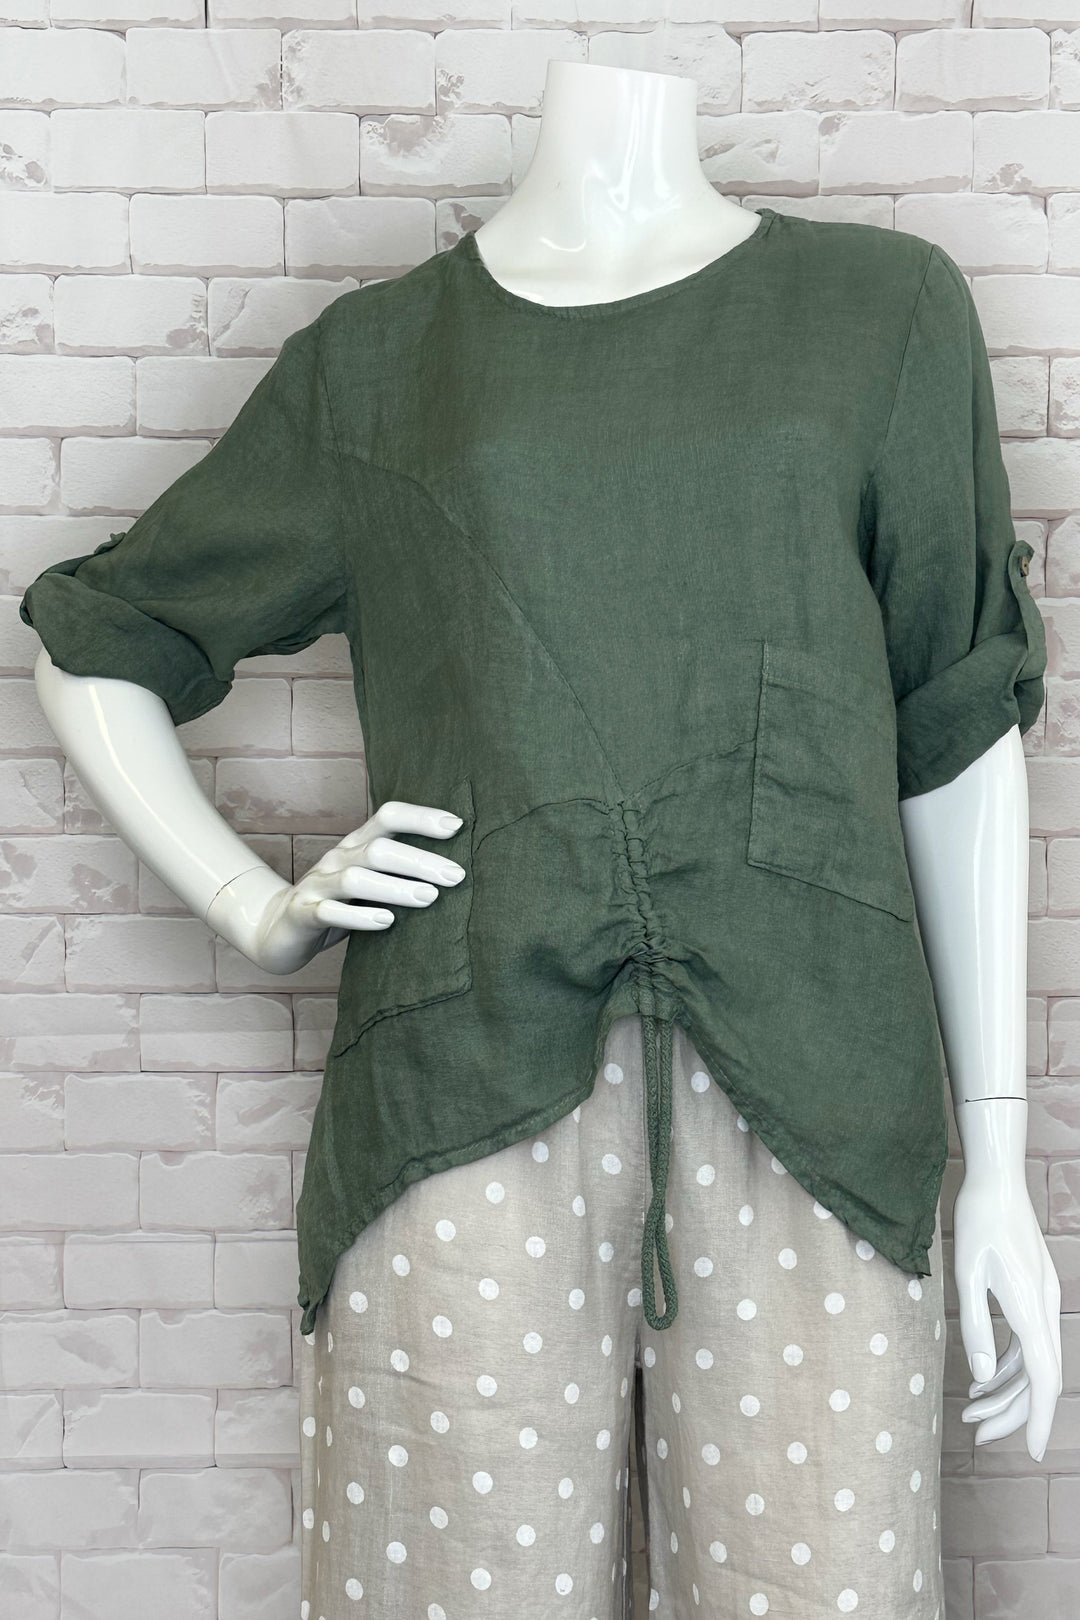 Cherishh Spring 2024 With side hem cuts, a round neck and two front pockets, this top is both functional and fashionable. The button roll-up sleeves and ruched front hem with drawstring add a playful touch.